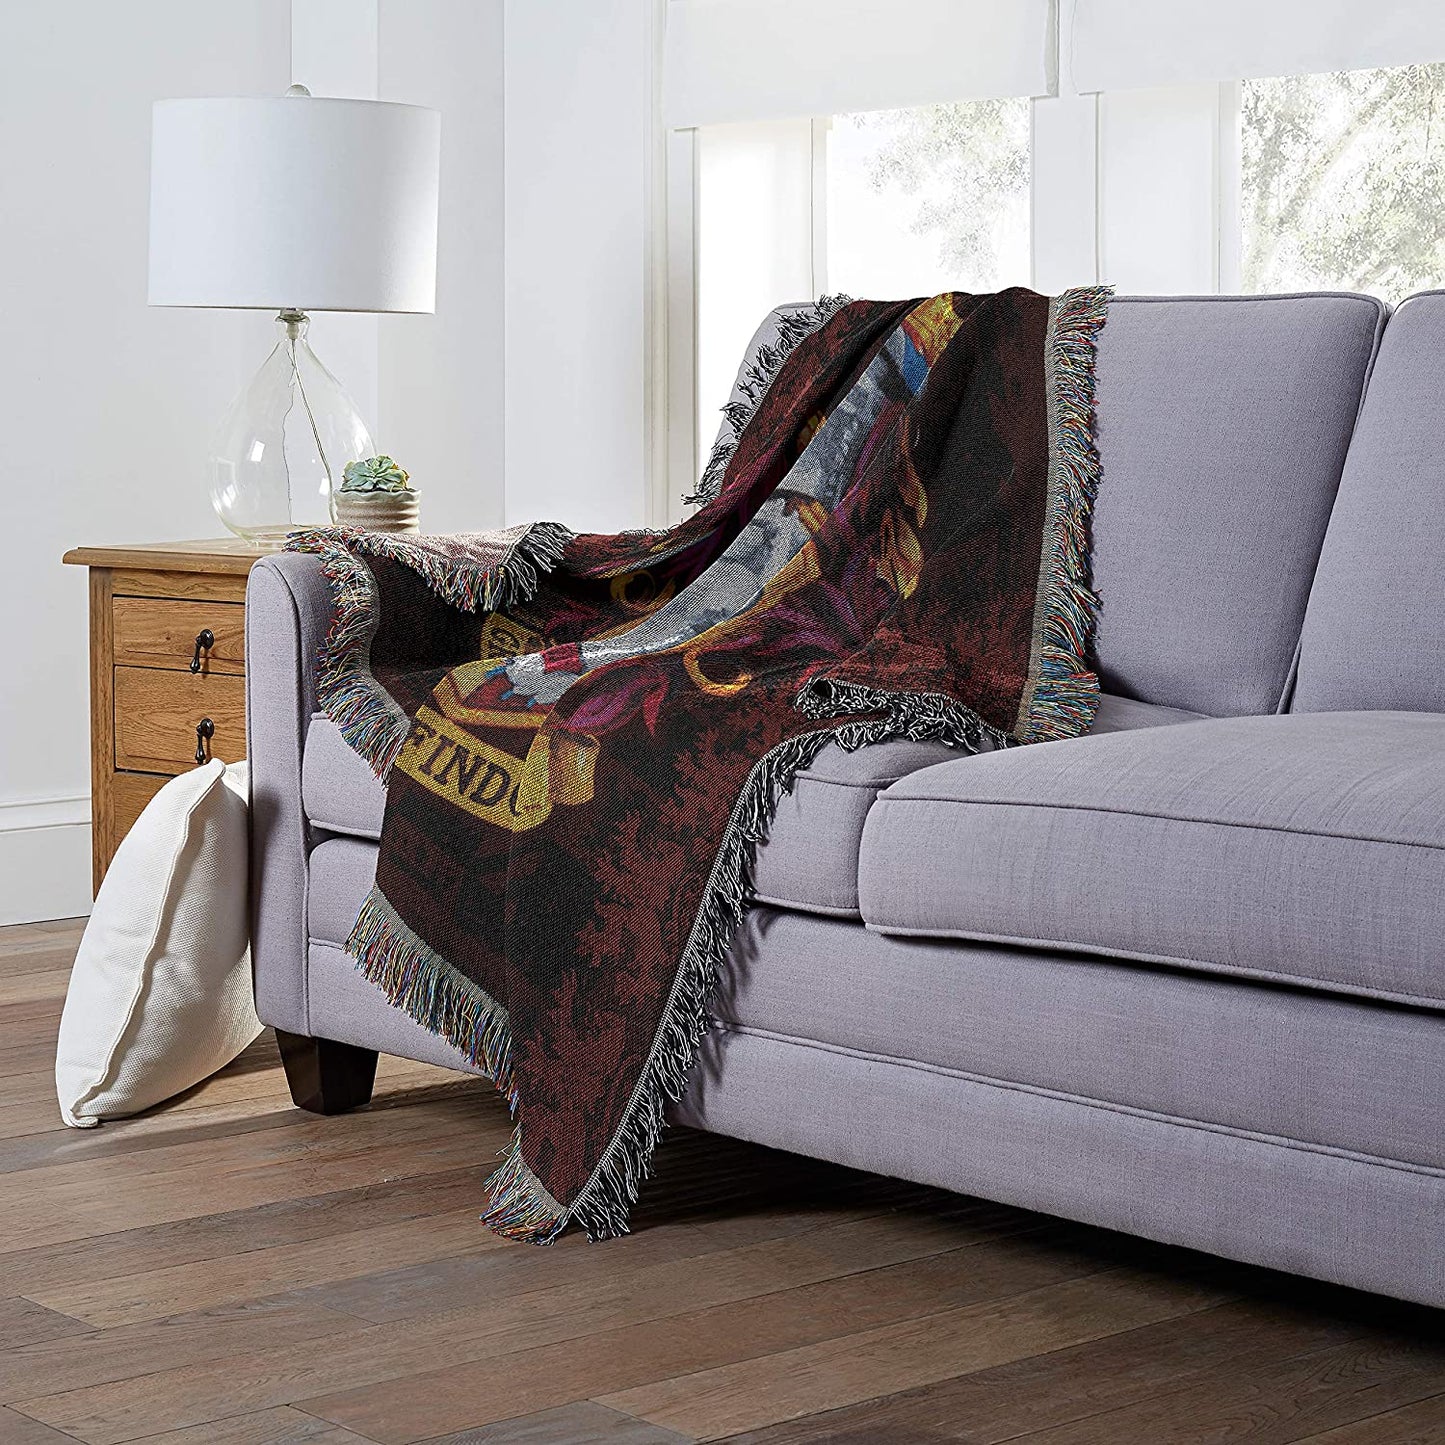 Gryffindor Harry Potter Woven Tapestry Throw Blanket